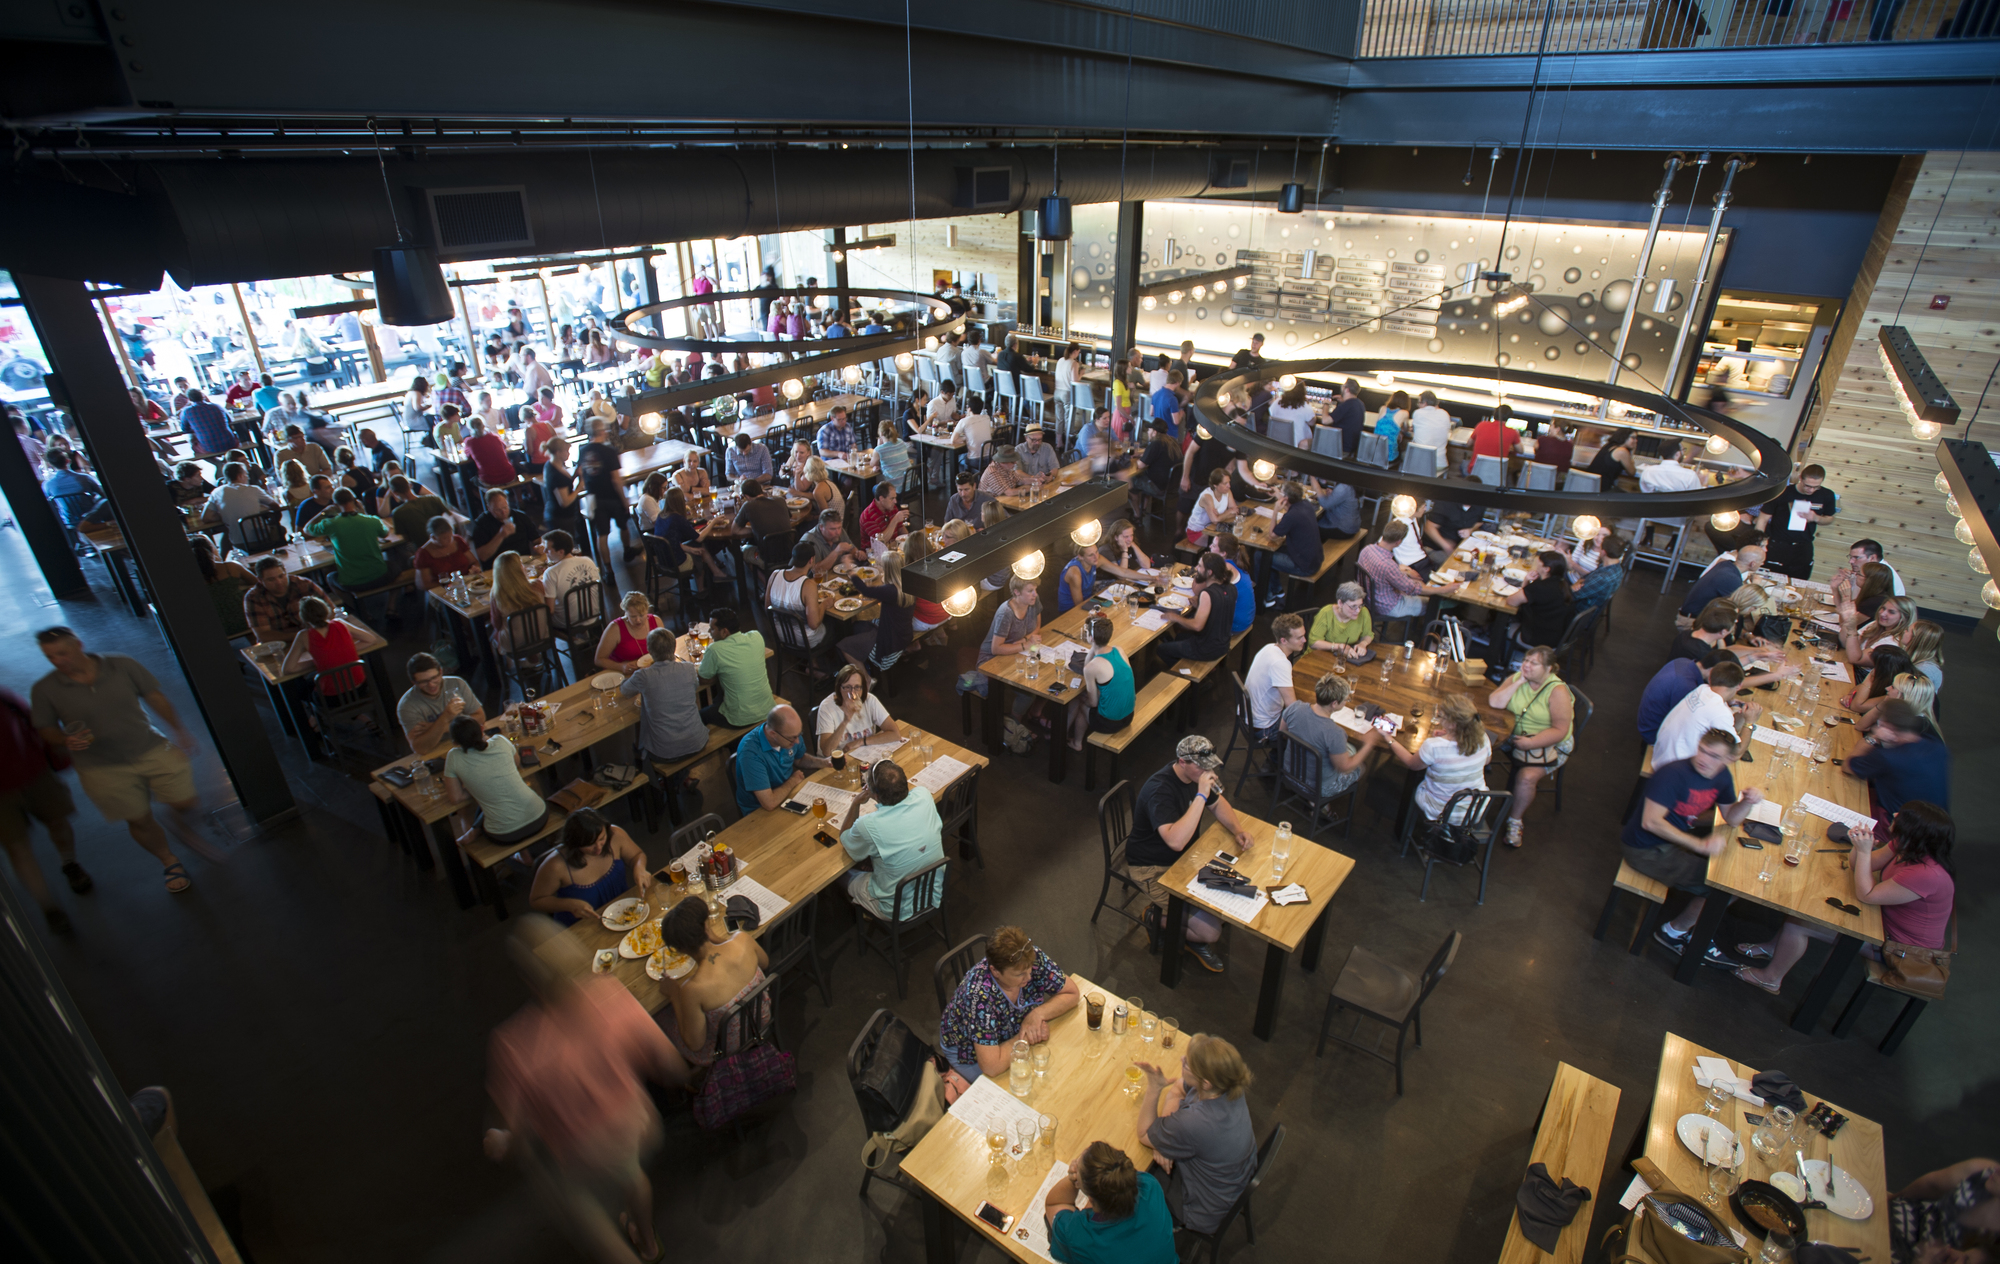 A typically busy day in the first-floor beer hall at Surly Brewing Co. in Minneapolis.